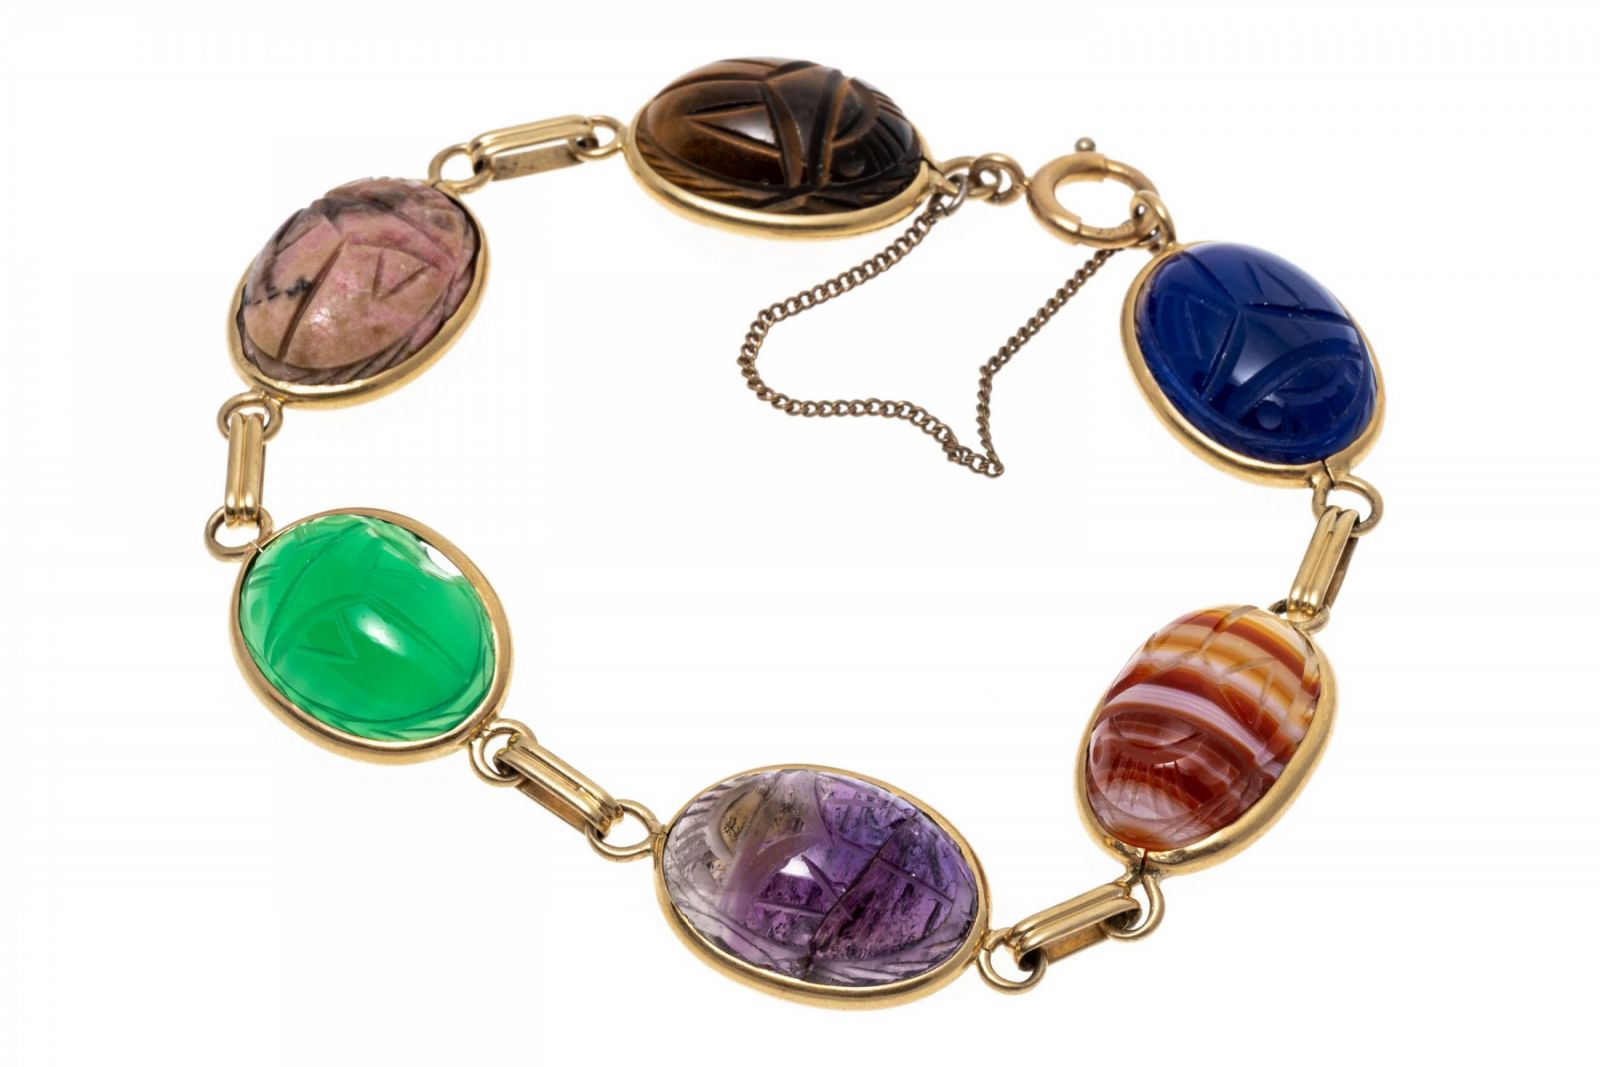 14k yellow gold bracelet. This attractive bracelet is a scarab link style, set with carved tigers eye, rhodonite, green chalcedony, amethyst, agate and blue onyx stones, bezel set